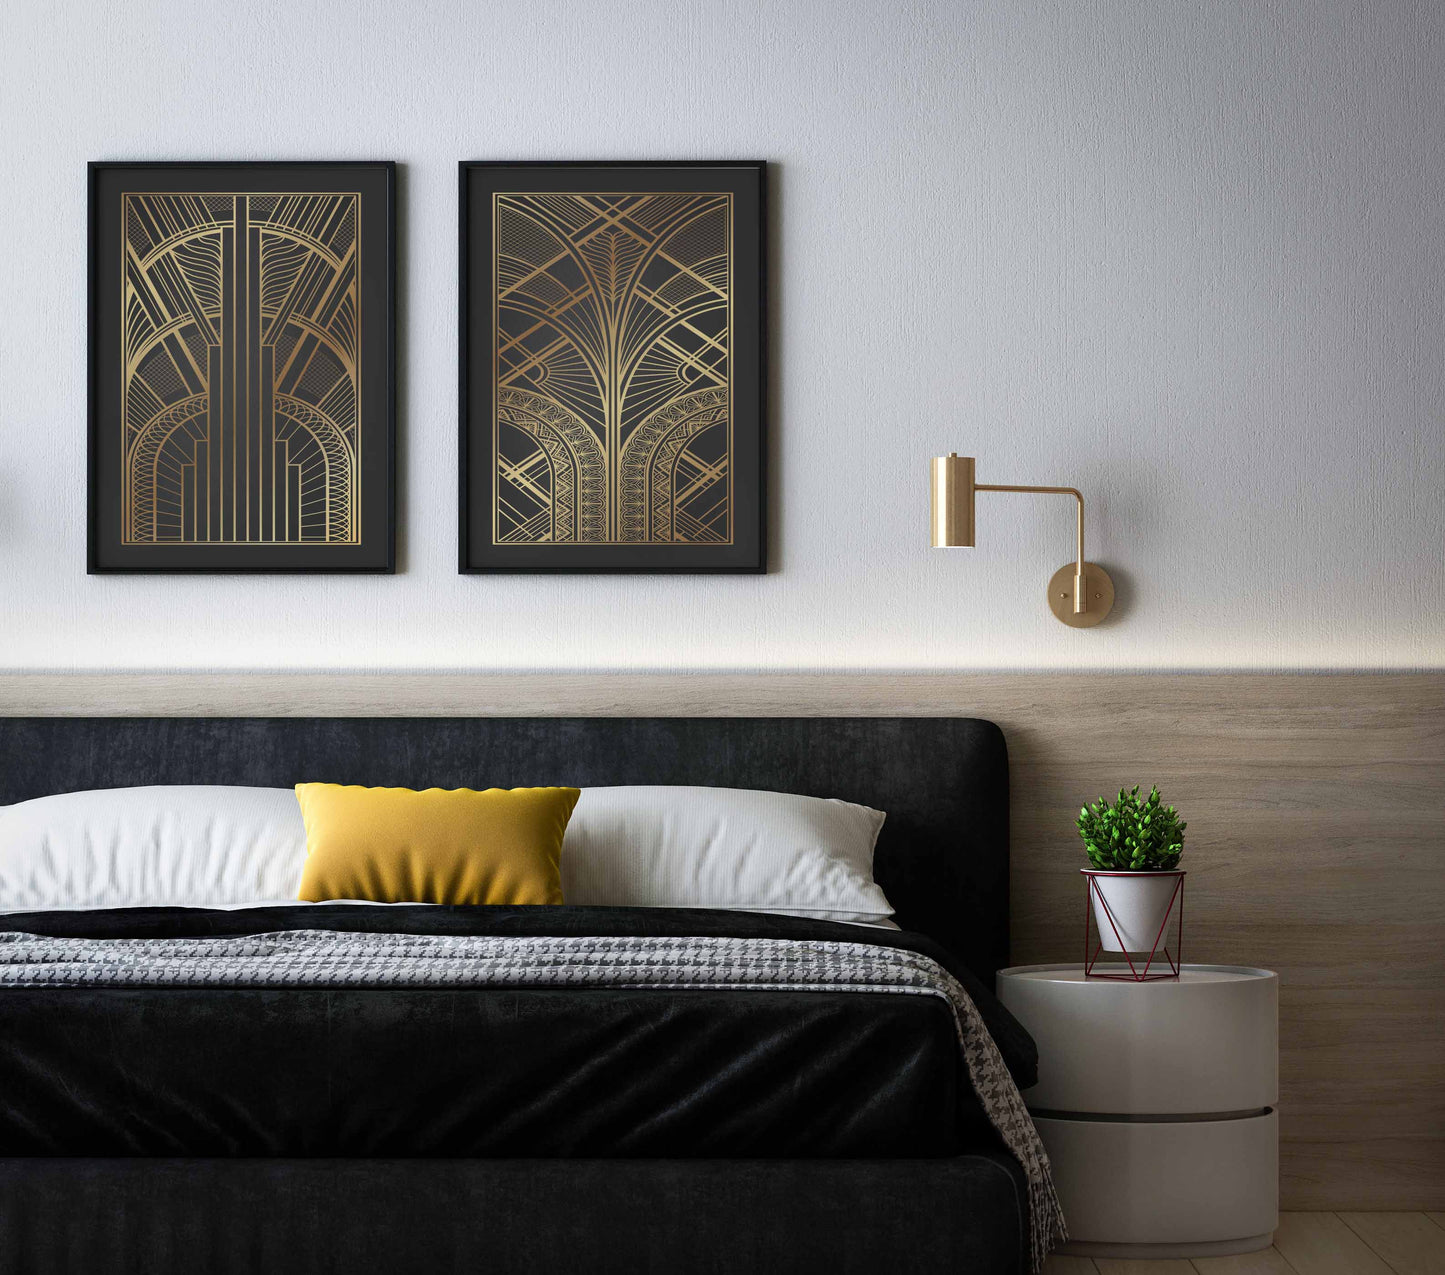 Set of 2 black and gold art deco posters